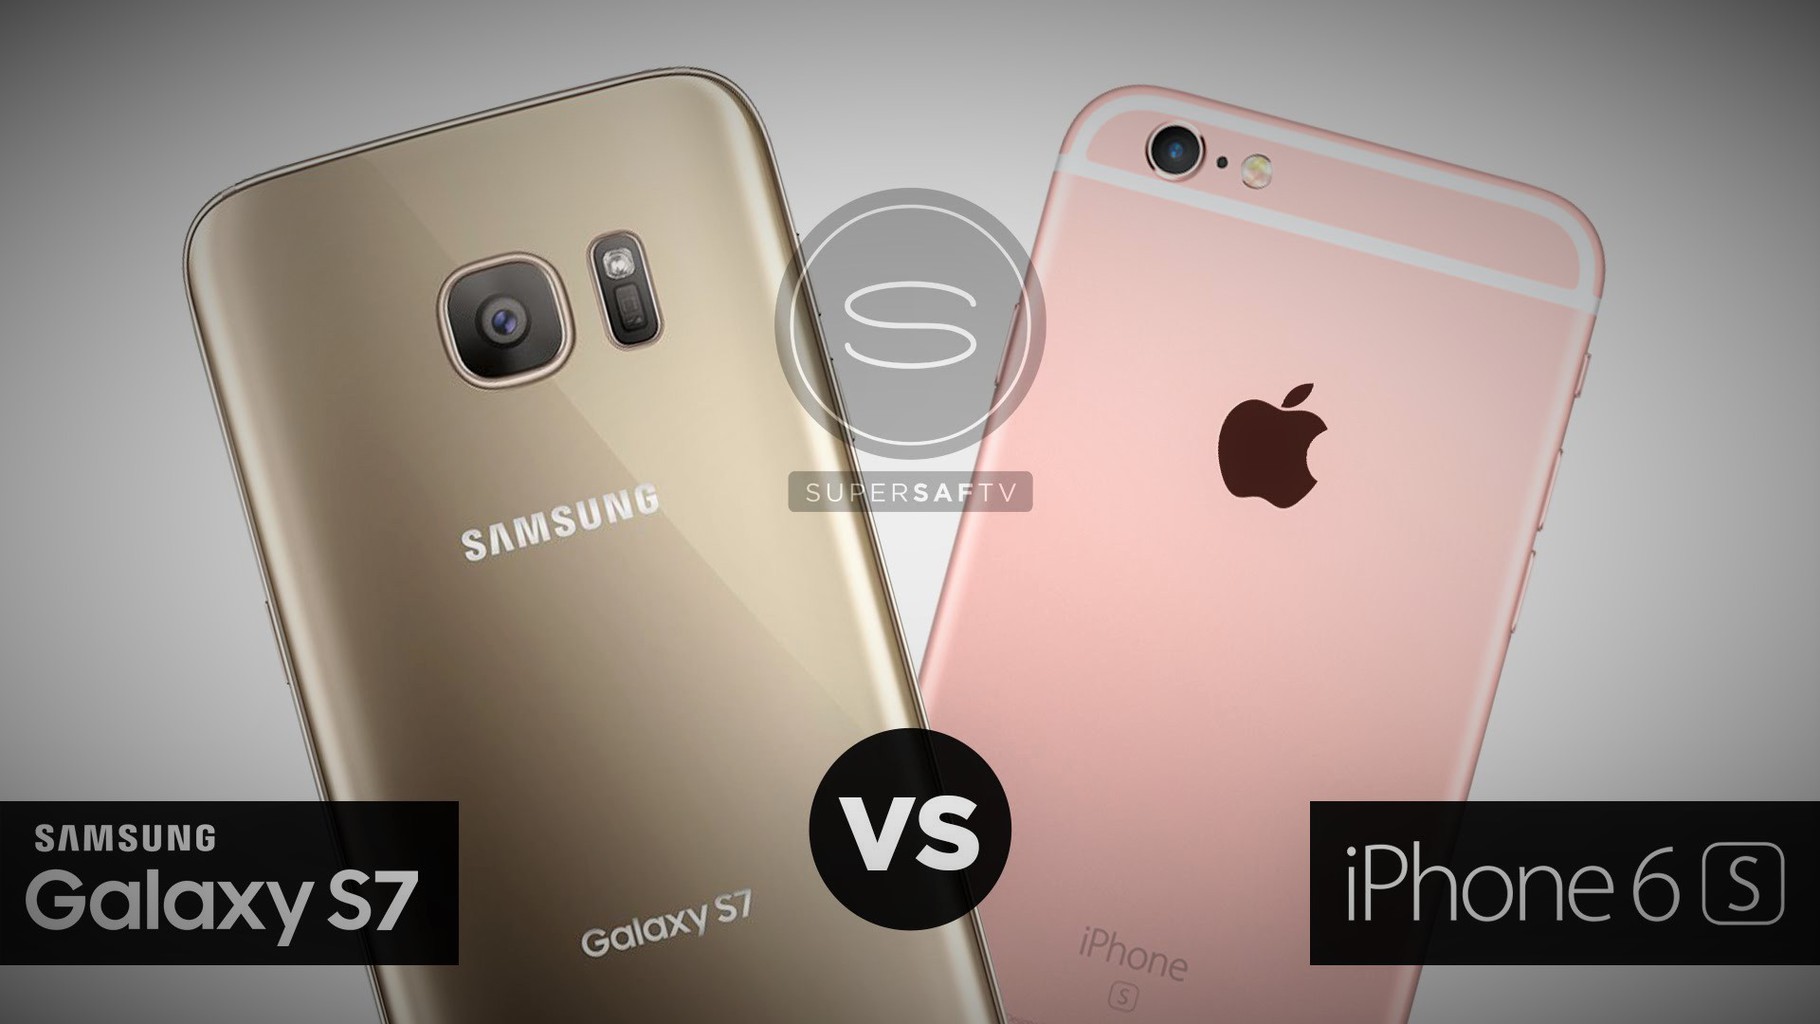 iPhone 6s and samsung galaxy s7